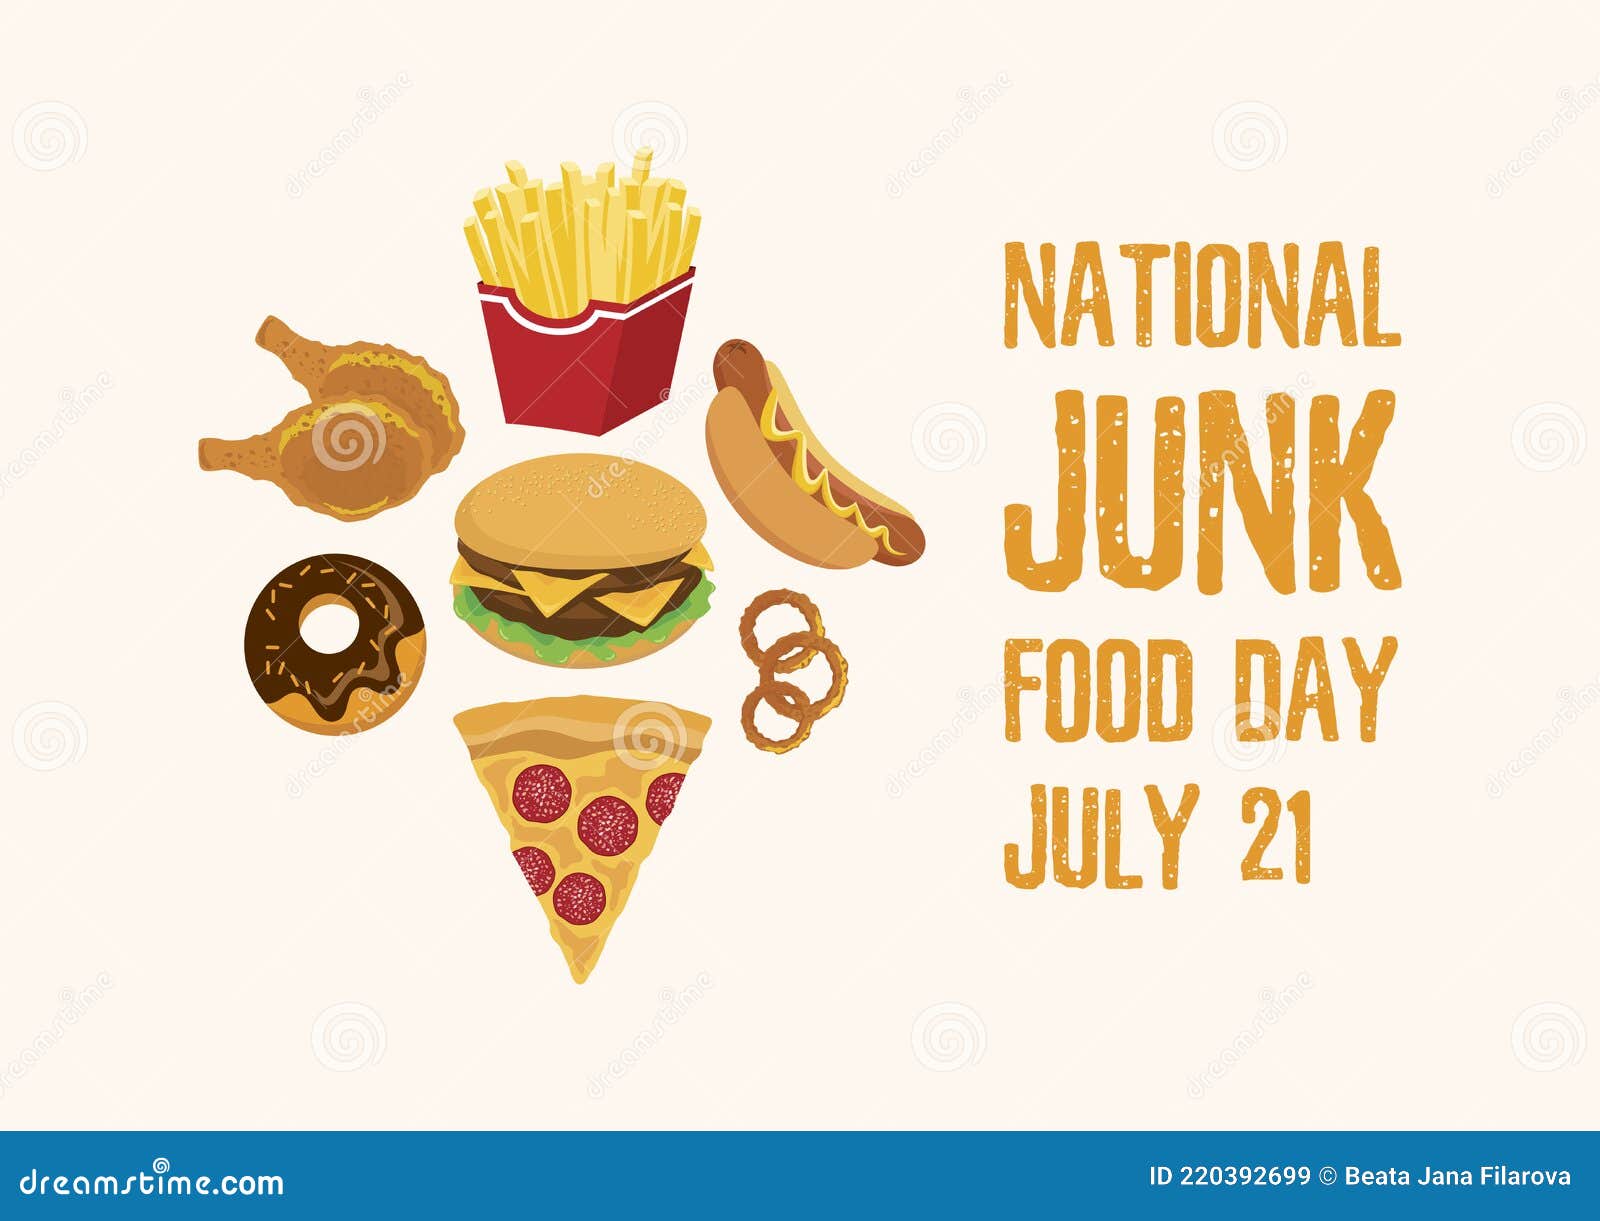 National Junk Food Day Vector Stock Vector Illustration of fried